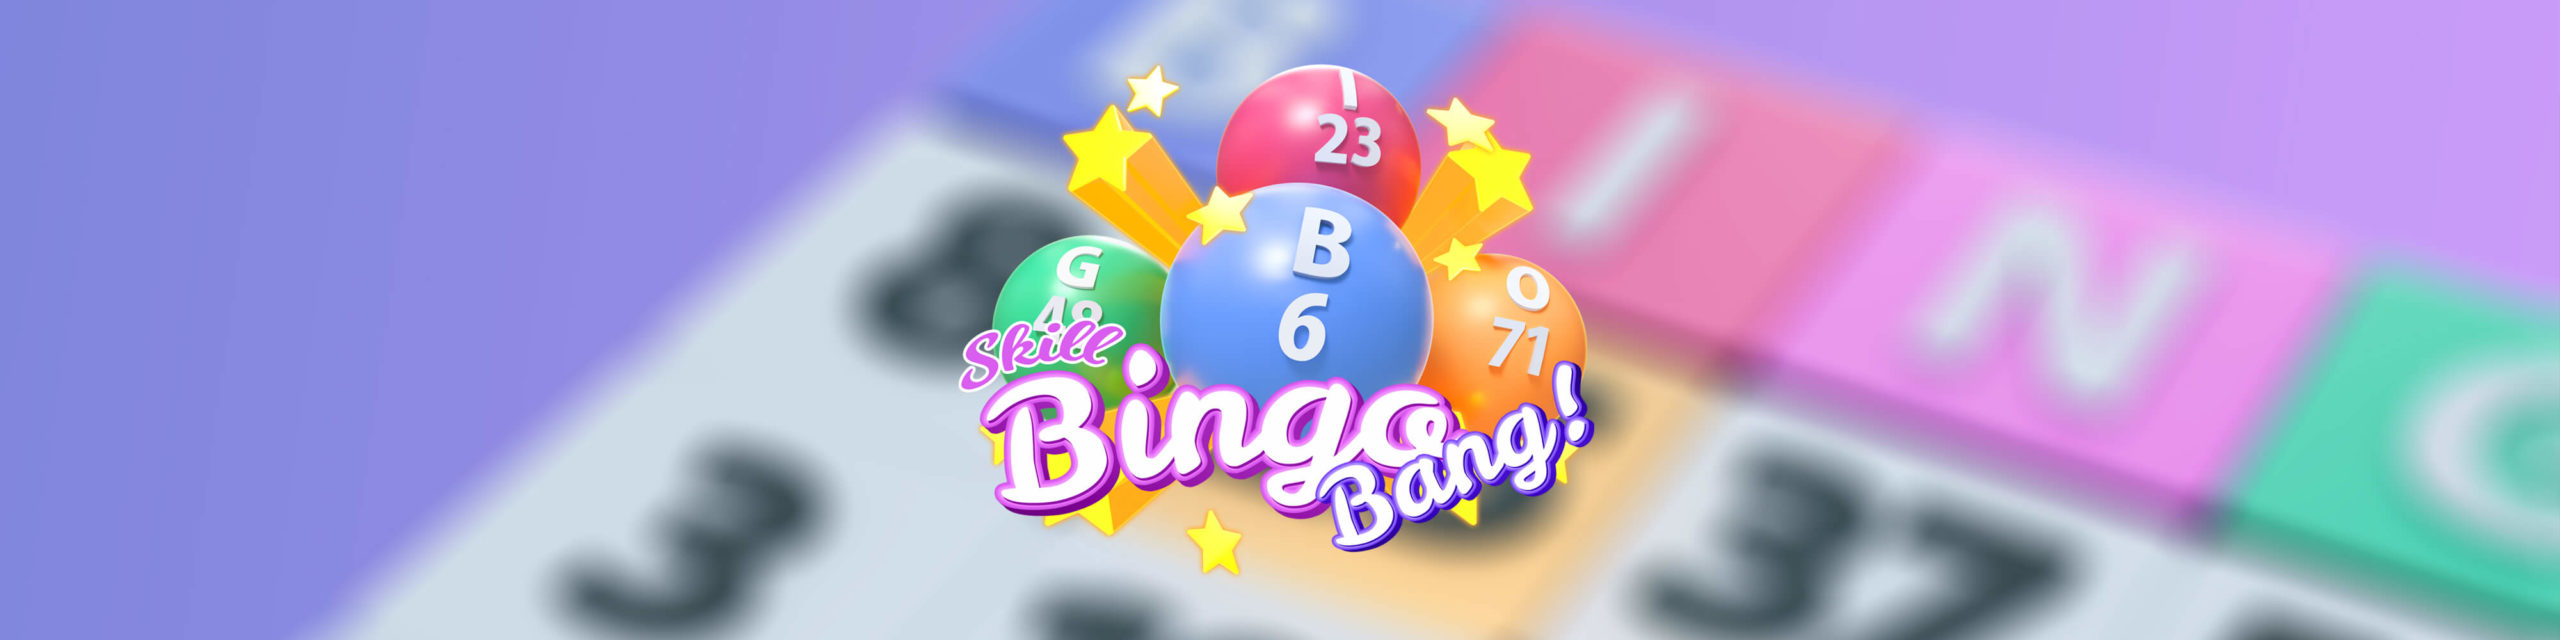 EazeGames launches first-ever 100% skill-based Bingo game